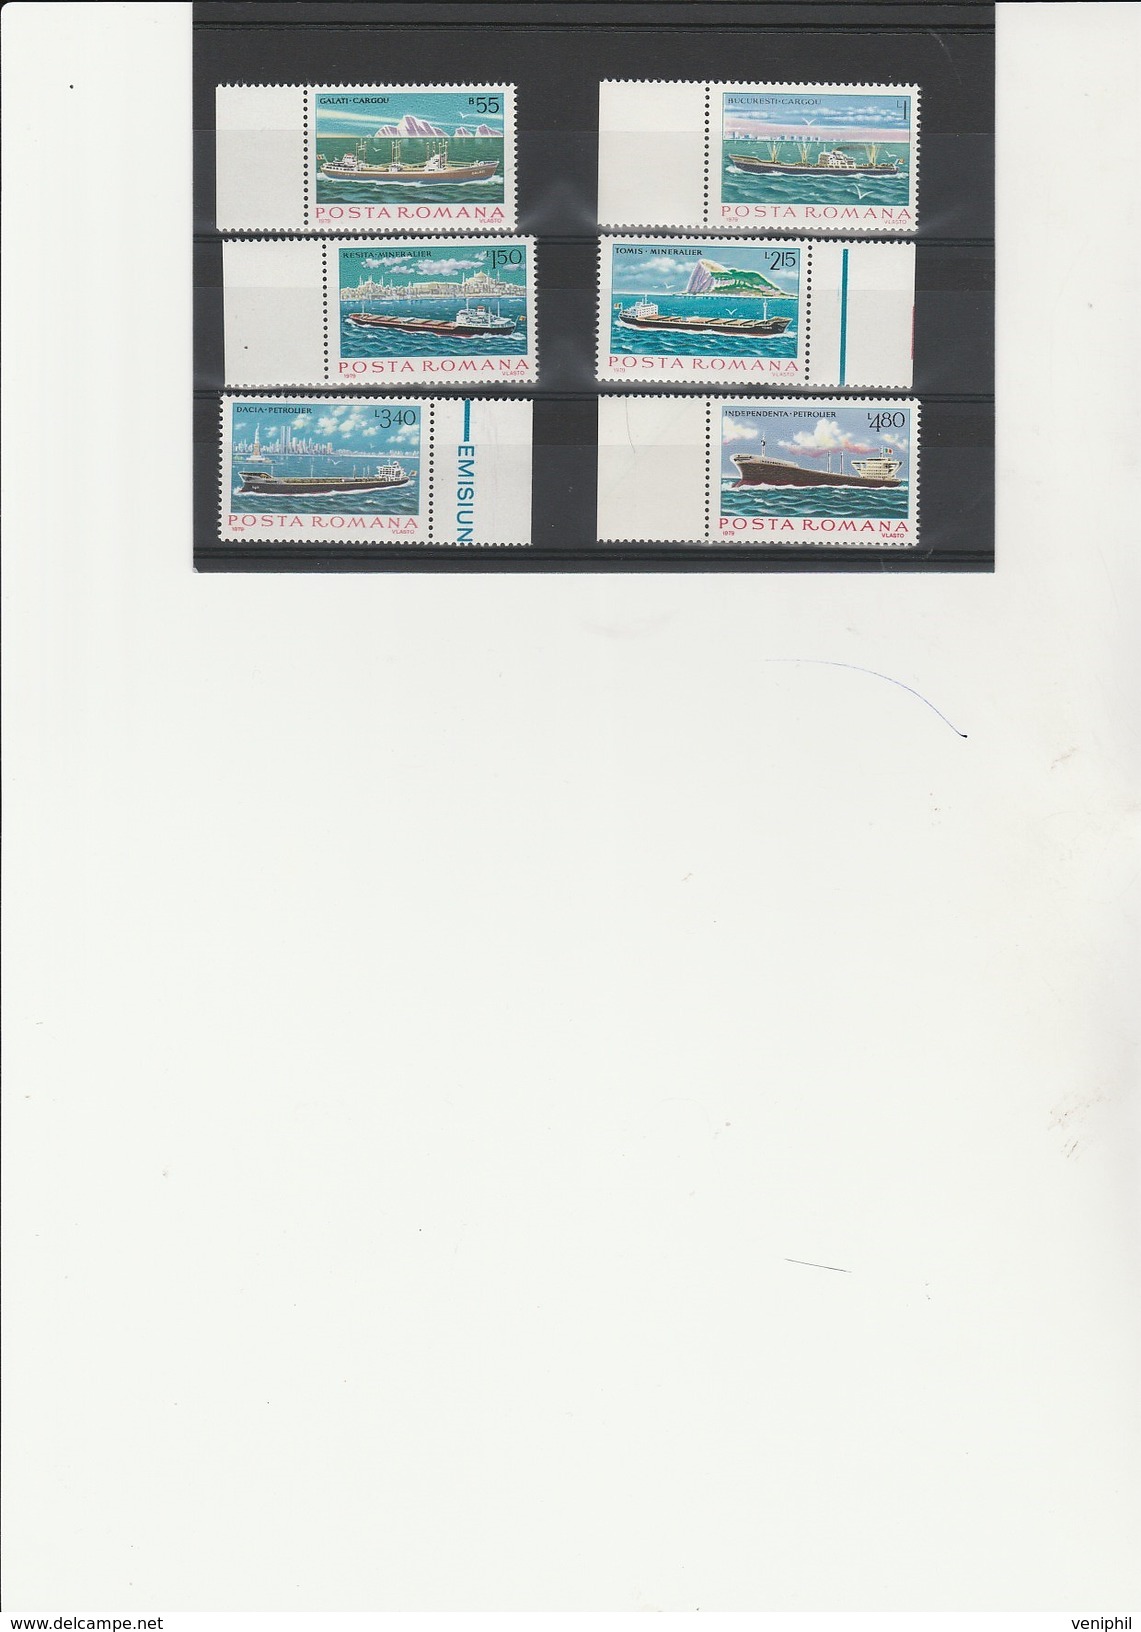 ROUMANIE  - TIMBRES N° 3191 A 3196 NEUF BORD DE FEUILLE -BATIMENT MARINE MARCHANDE - ANNEE 1979 - Nuovi